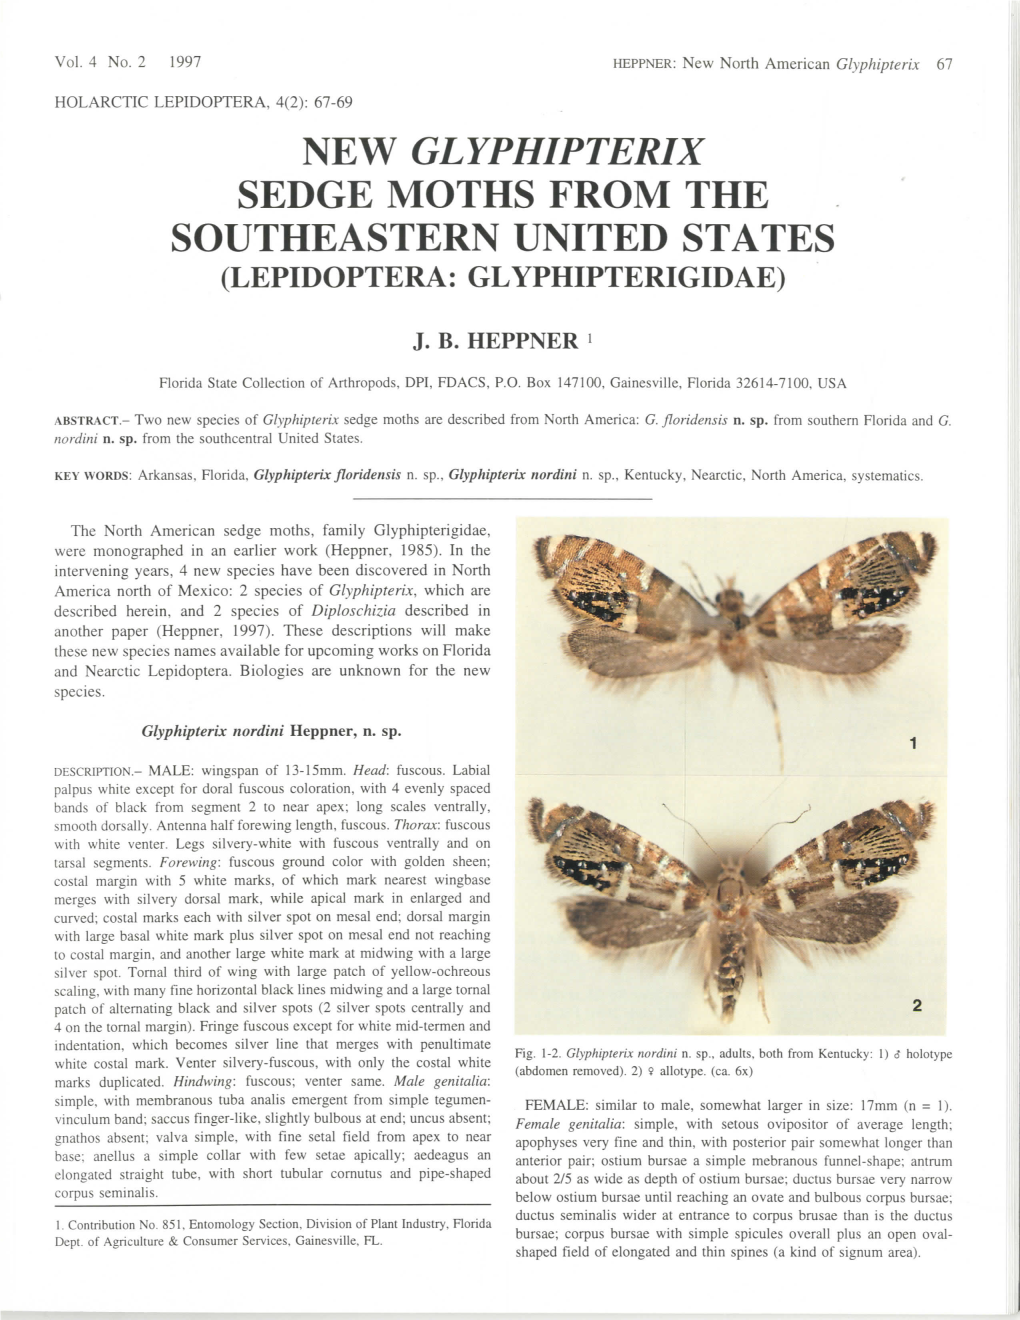 New Glyphipterix Sedge Moths from the Southeastern United States (Lepidoptera: Glyphipterigidae)